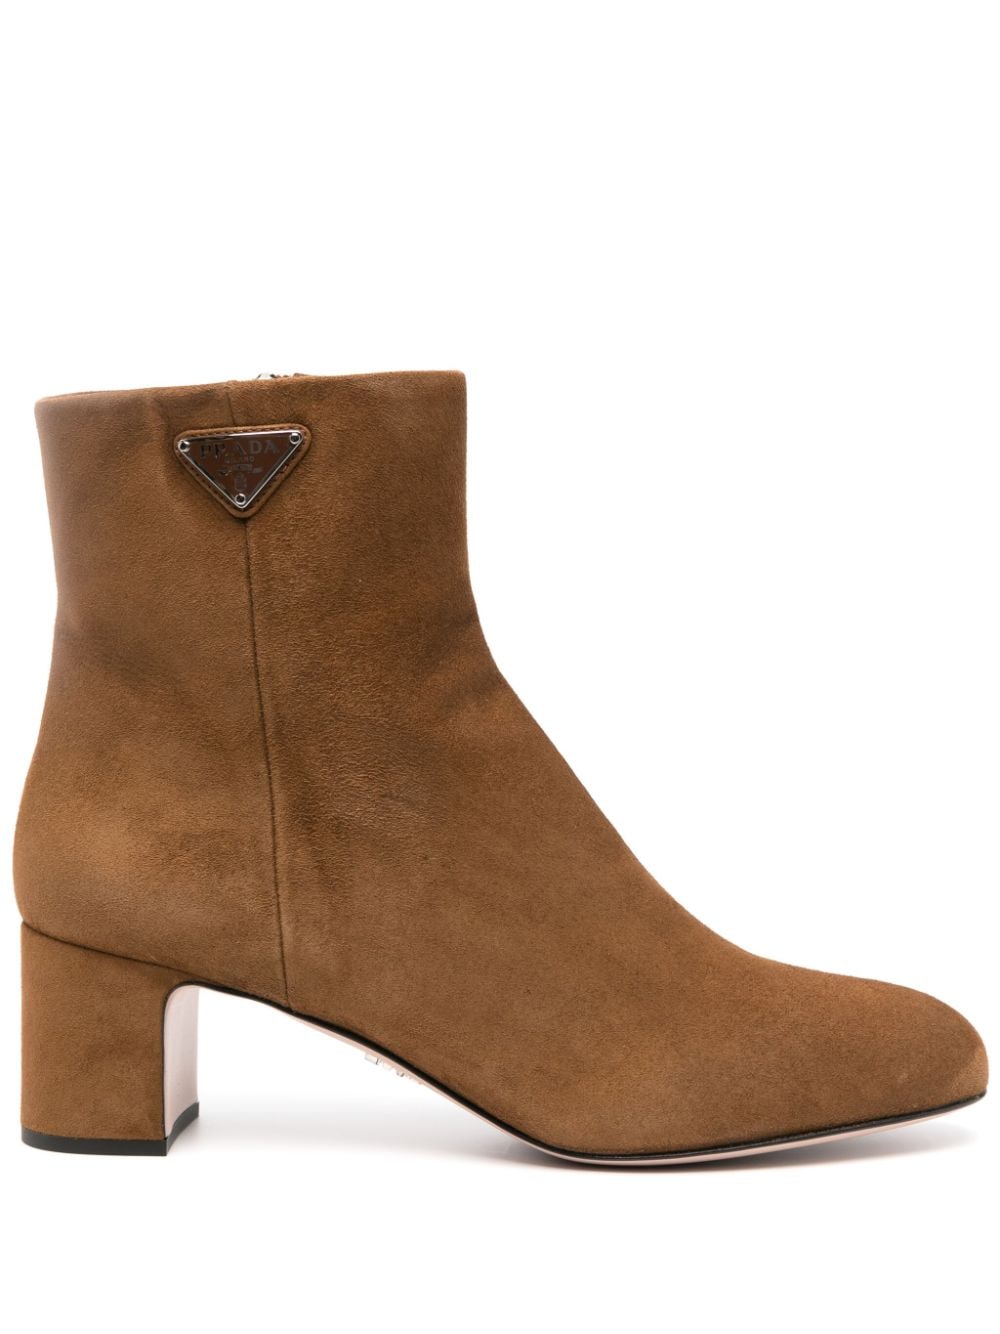 Prada triangle-plaque ankle boots - Brown